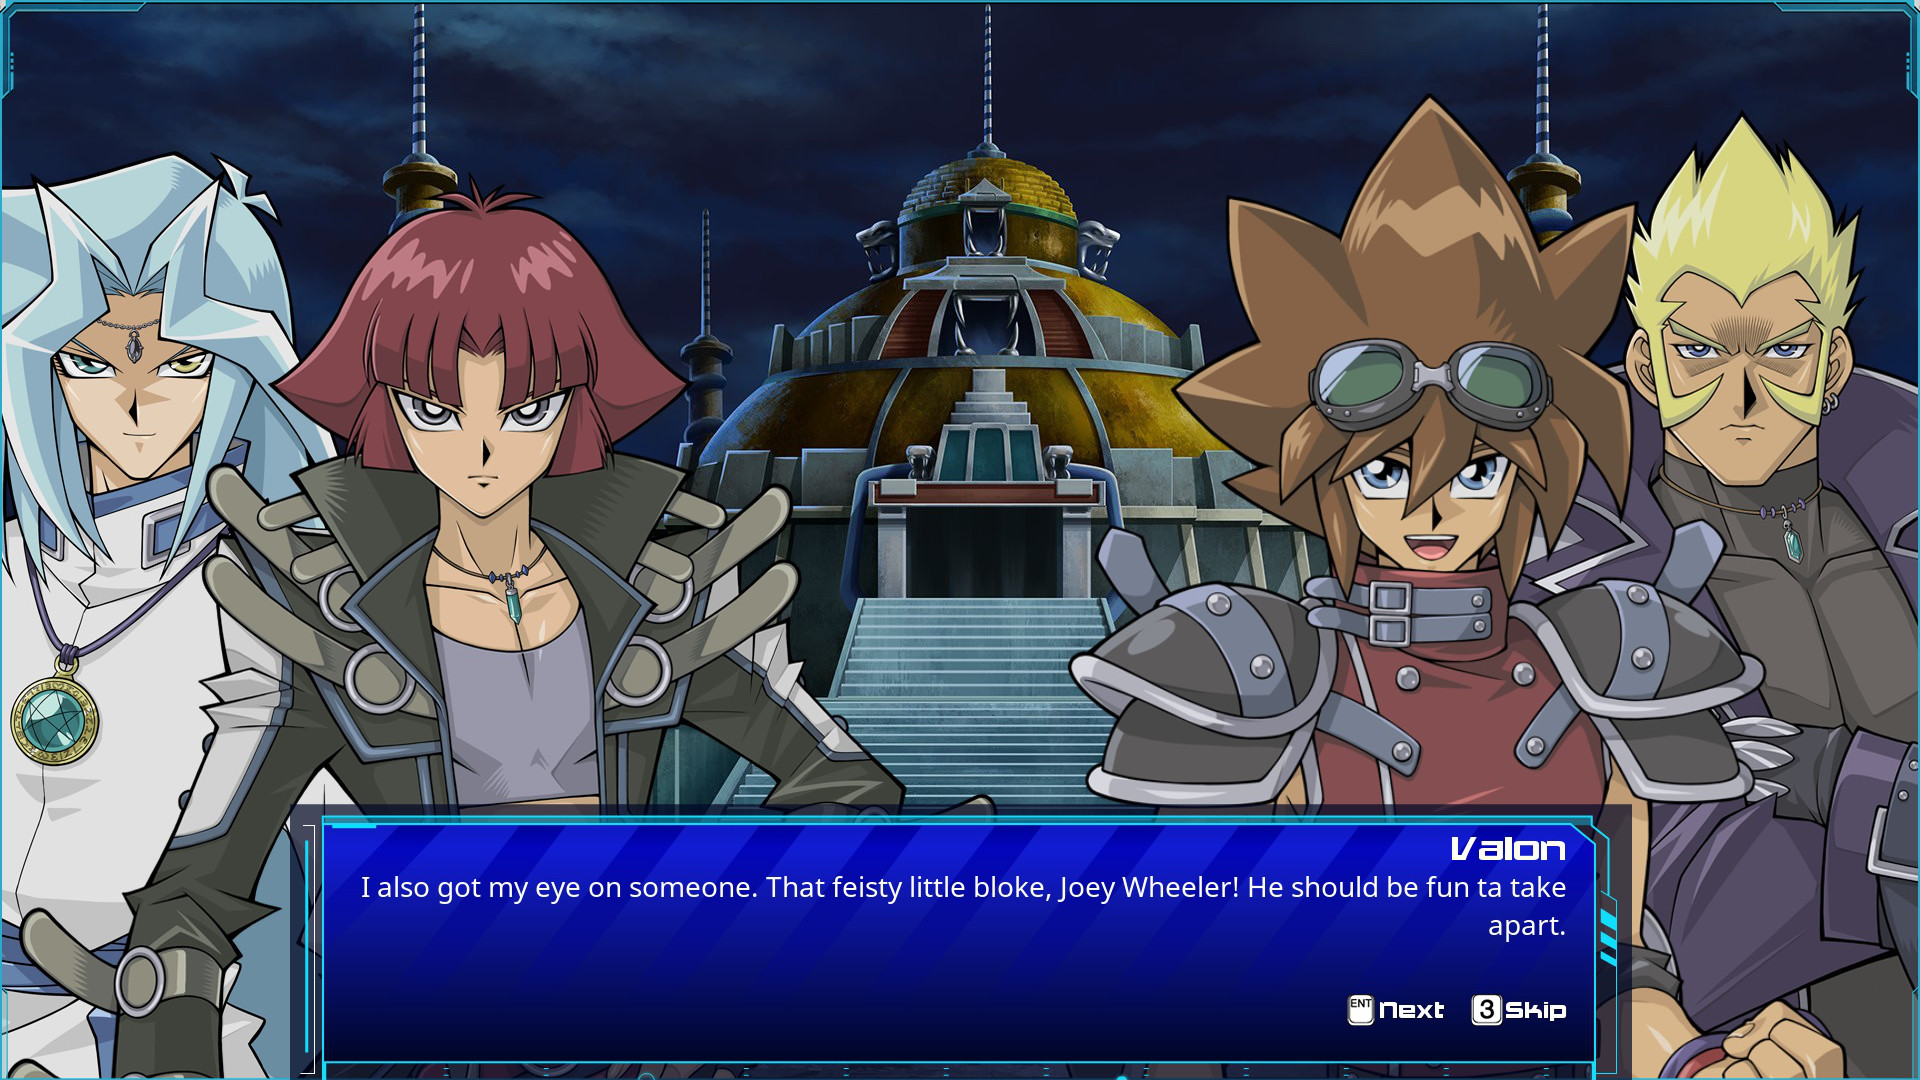 [$ 0.88] Yu-Gi-Oh! Legacy of the Duelist - Waking the Dragons: Joey’s Journey DLC Steam CD Key